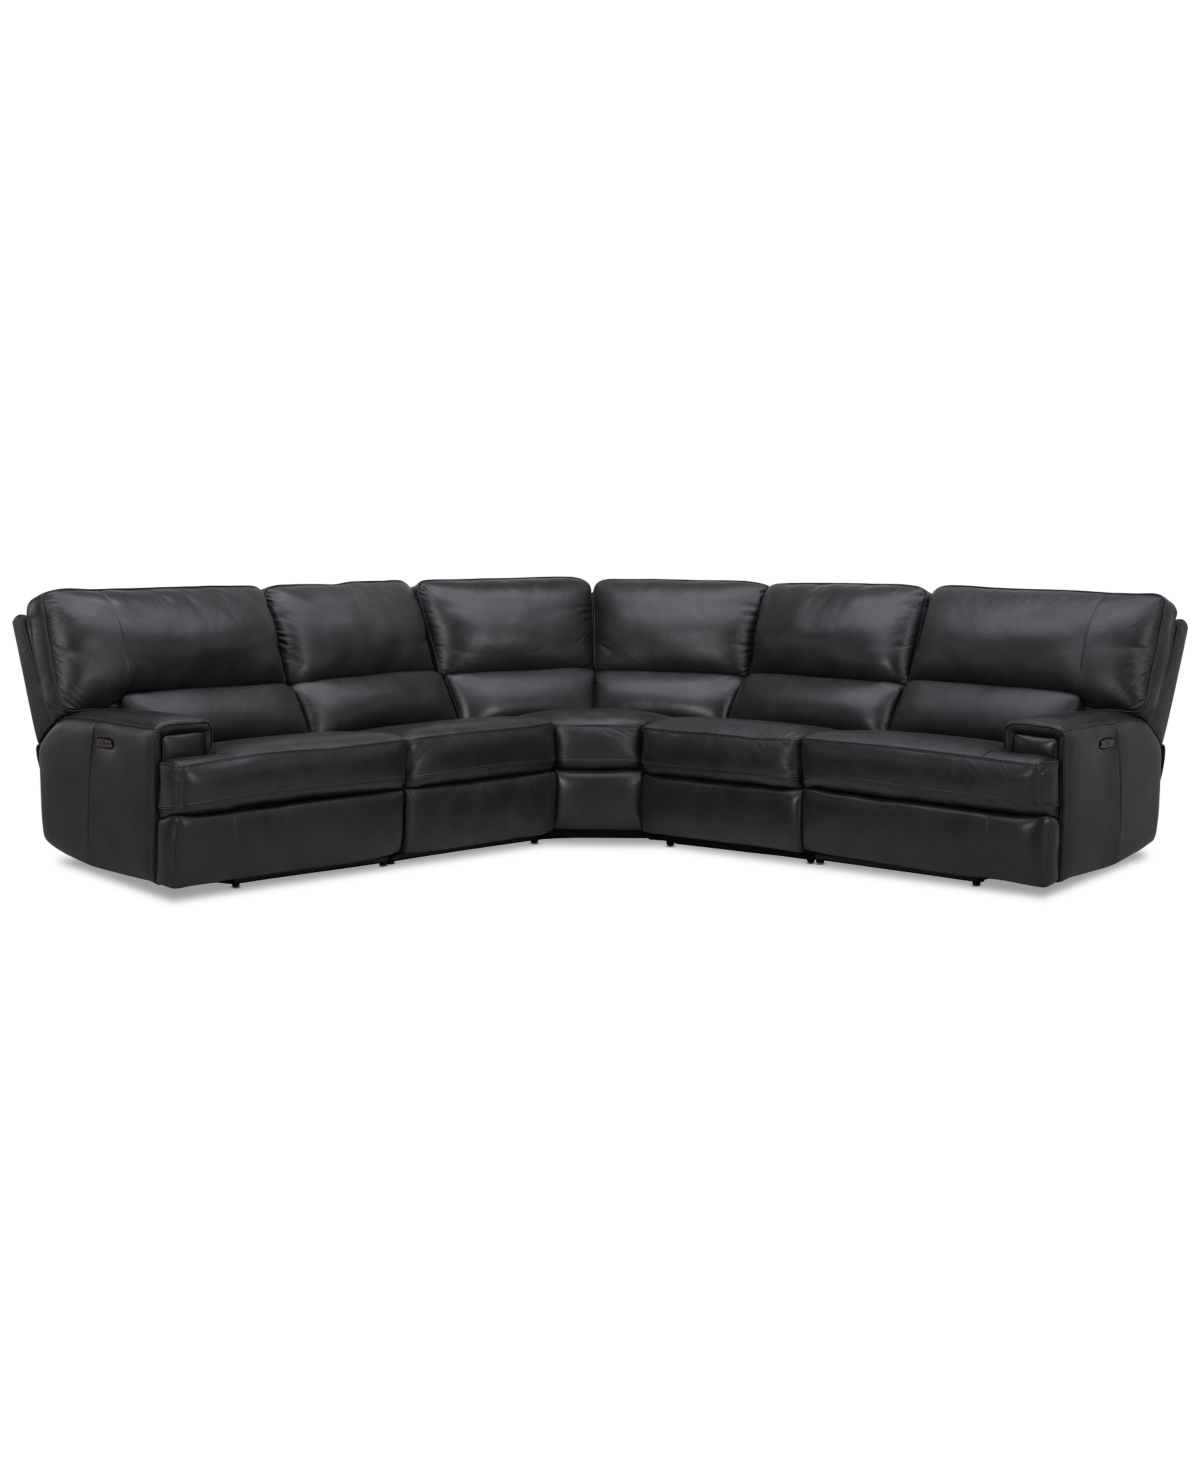 Furniture Binardo 123" 5 Pc Zero Gravity Leather Sectional With 2 Power Recliners, Created For Macy's In Charcoal